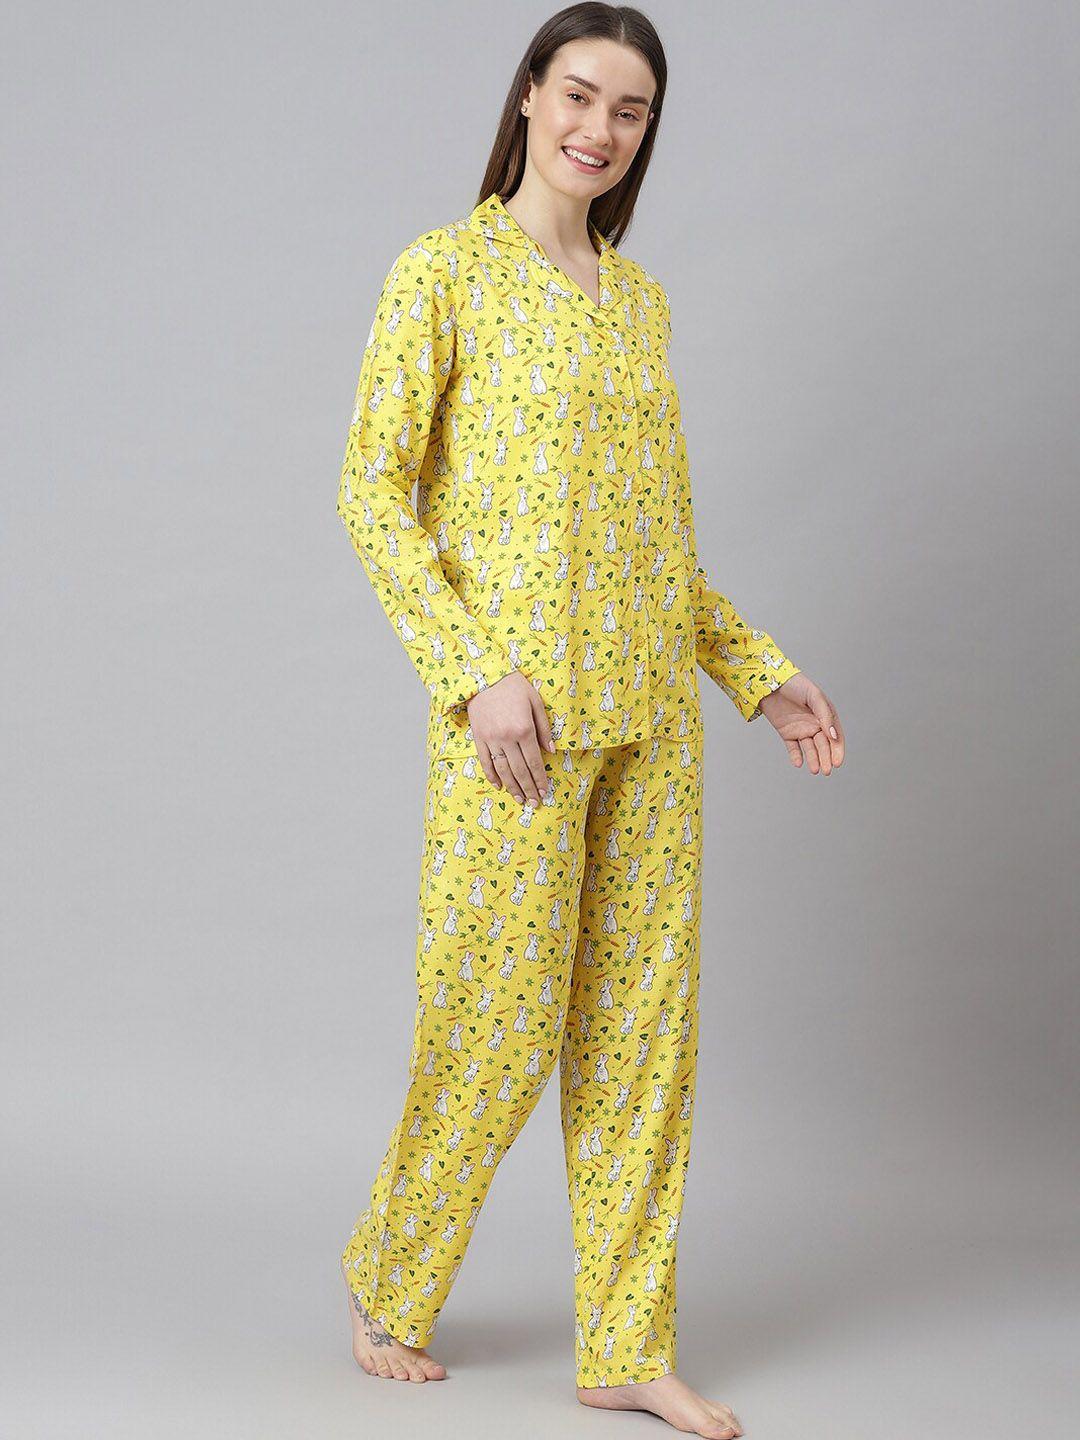 cation women yellow & white humour and comic printed night suit